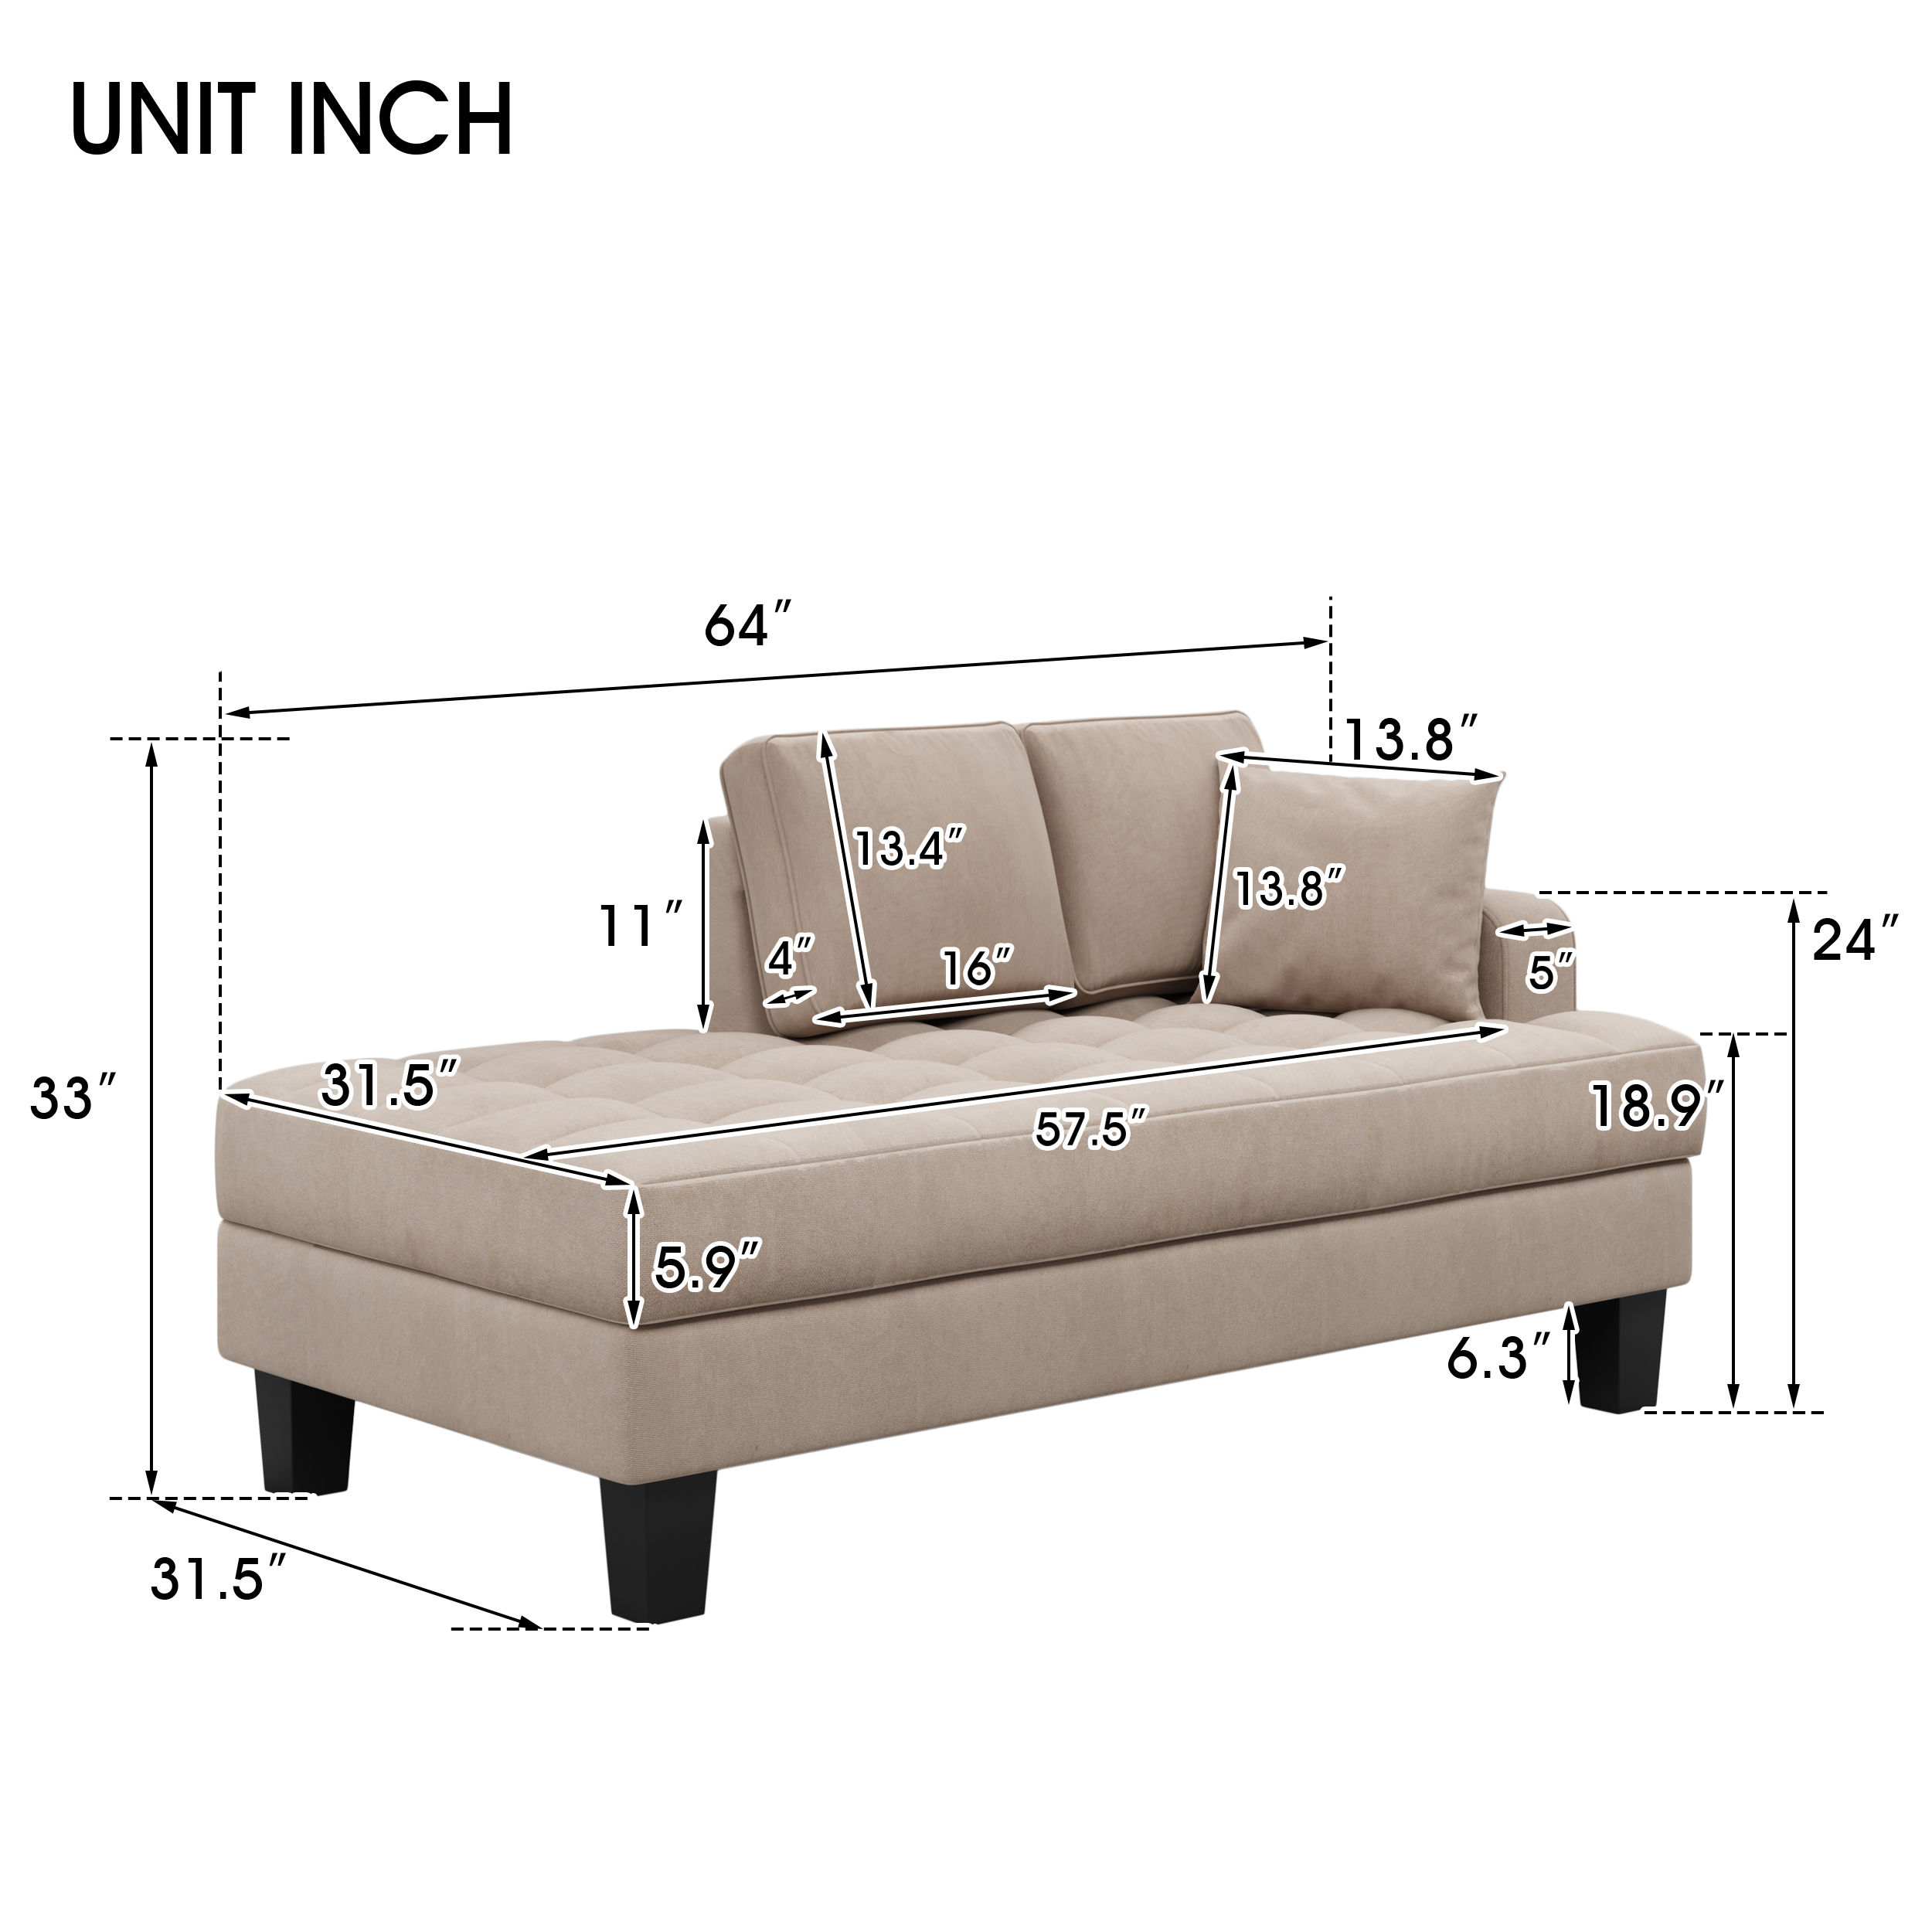 2 Pieces Chaise Lounge Set, 2 Toss Pillow Included